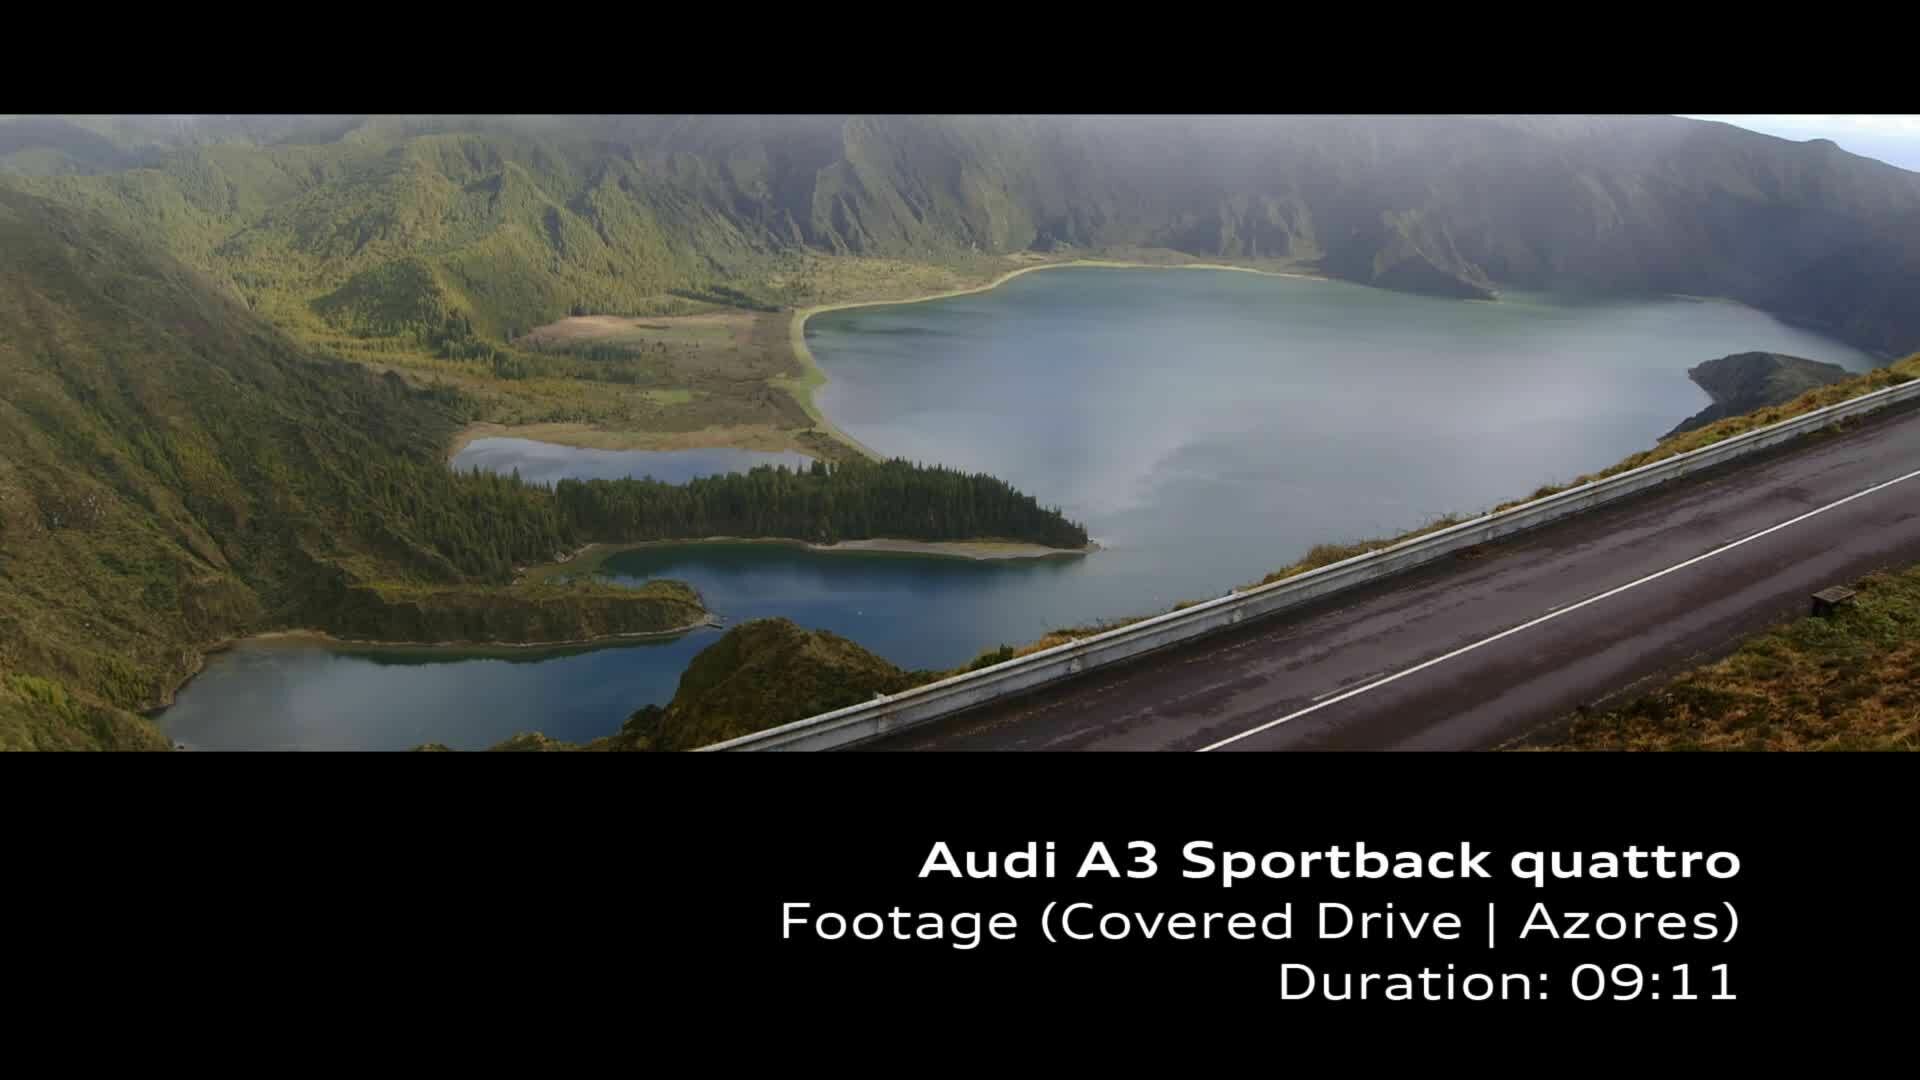 Footage: Audi A3 Sportback on Location (Covered Drive)